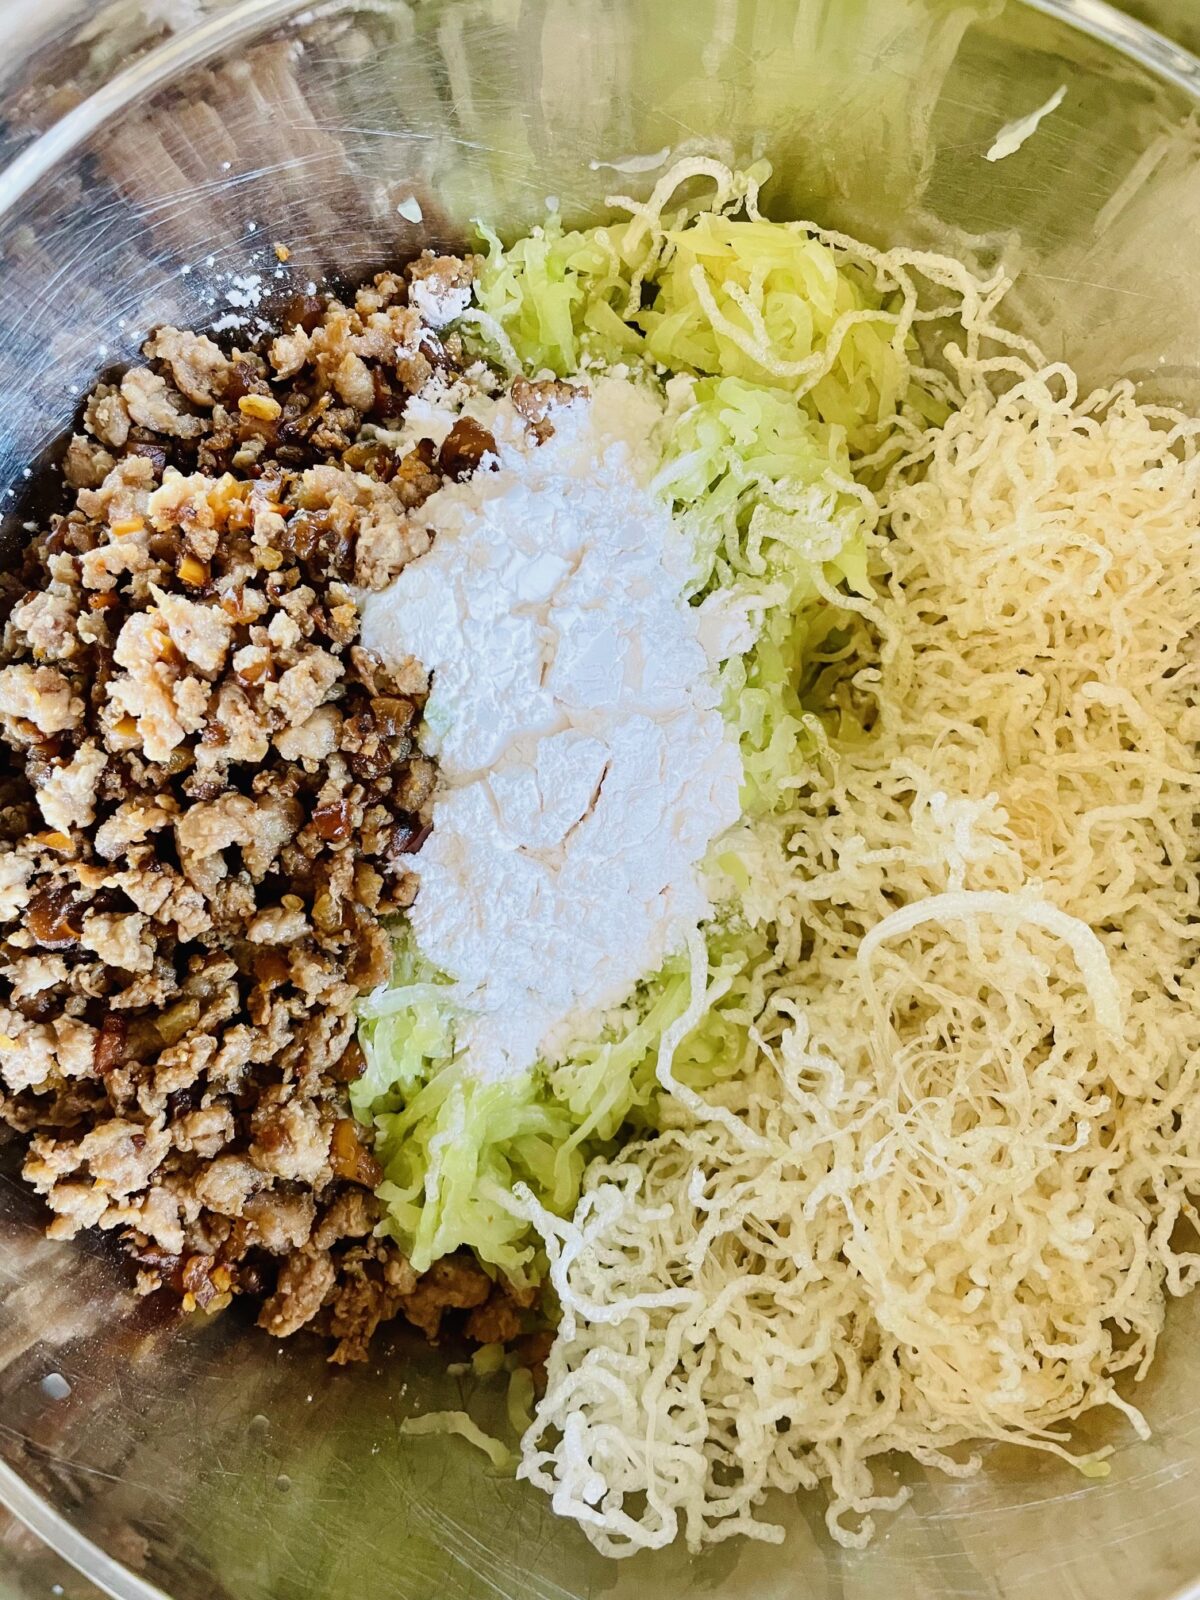 Boulette chouchou ingredients in stainless steel bowl. From left to right: chicken mixture, grated chayote, fried rice vermicelli. All topped with tapioca flour.